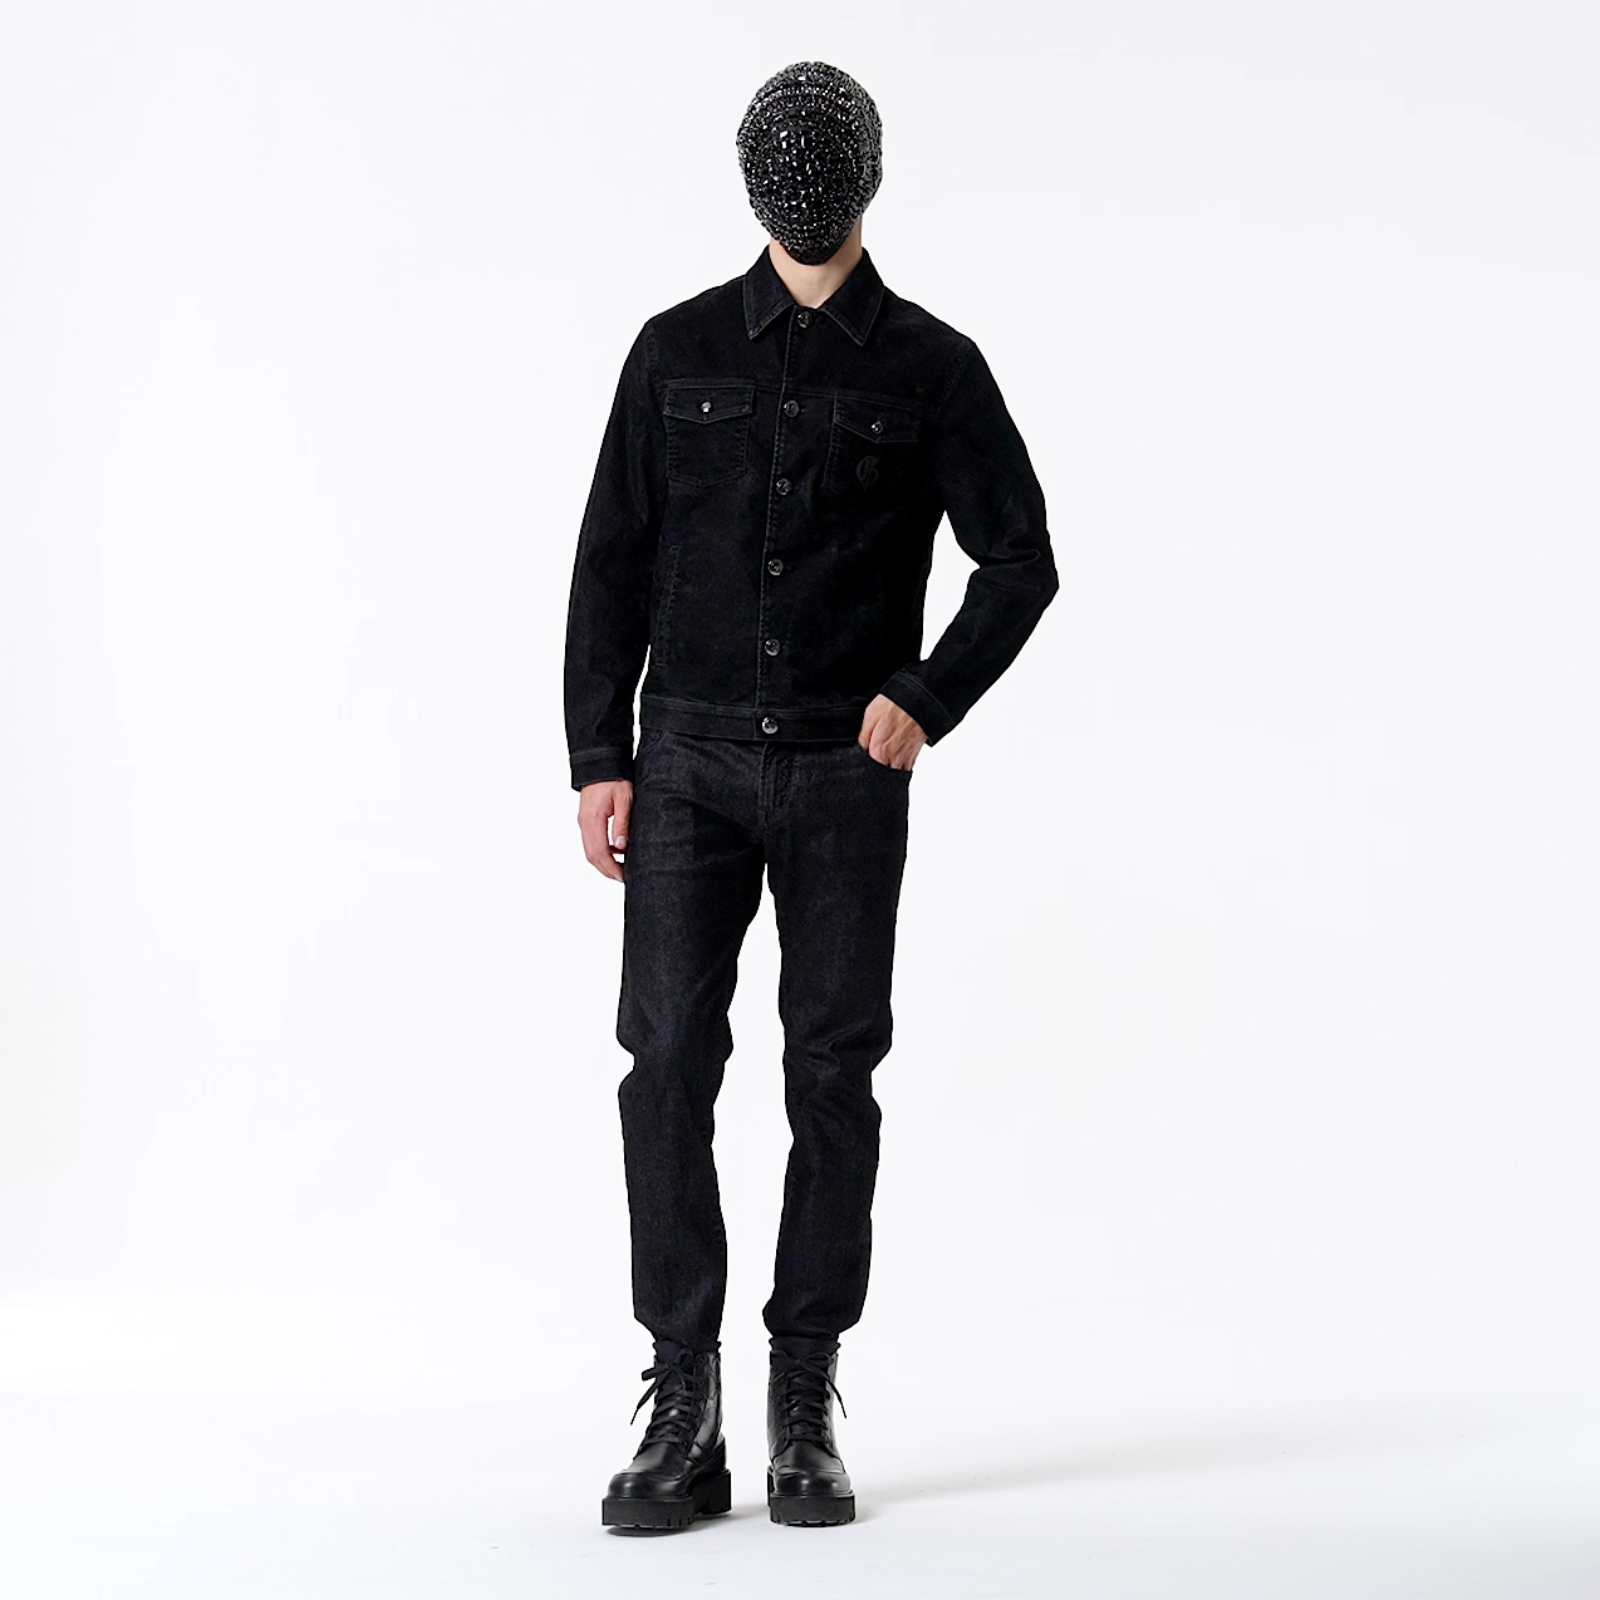 E-commerce photography for G Fashion. Man wearing black denim trousers and jacket